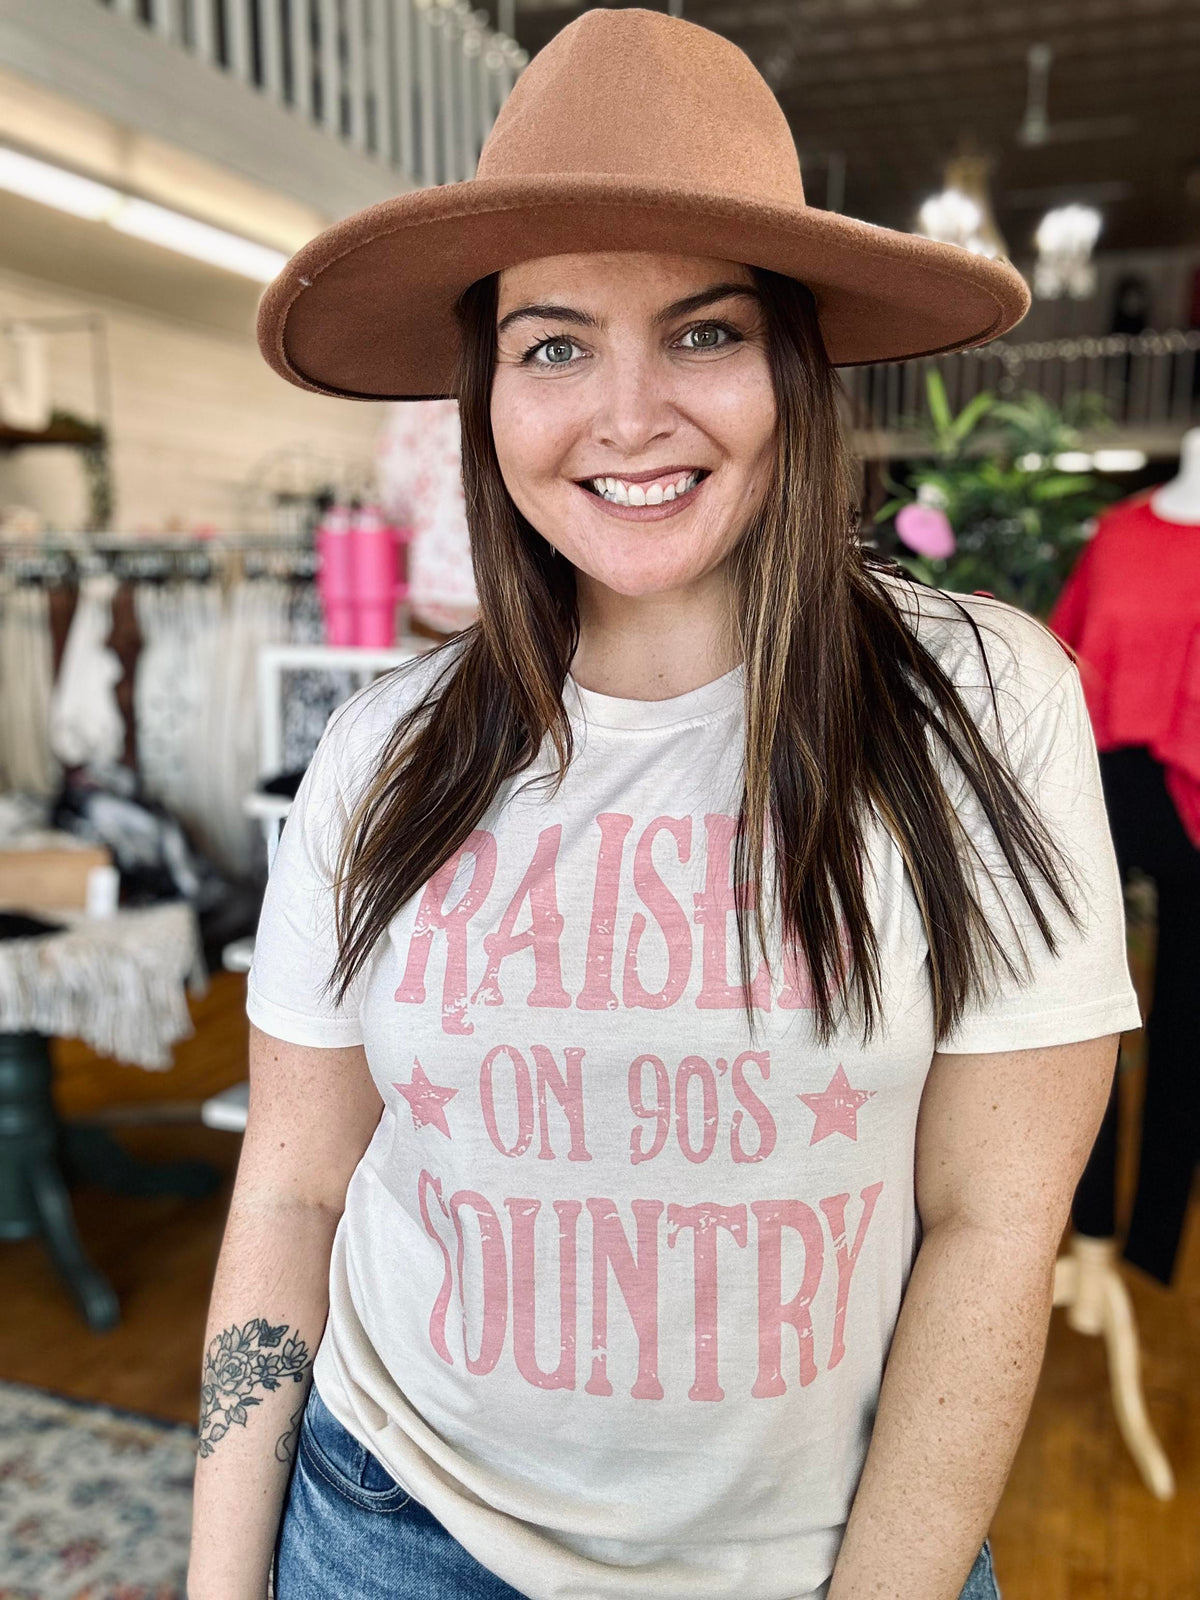 Raised on 90's Country Graphic Tee - Plus